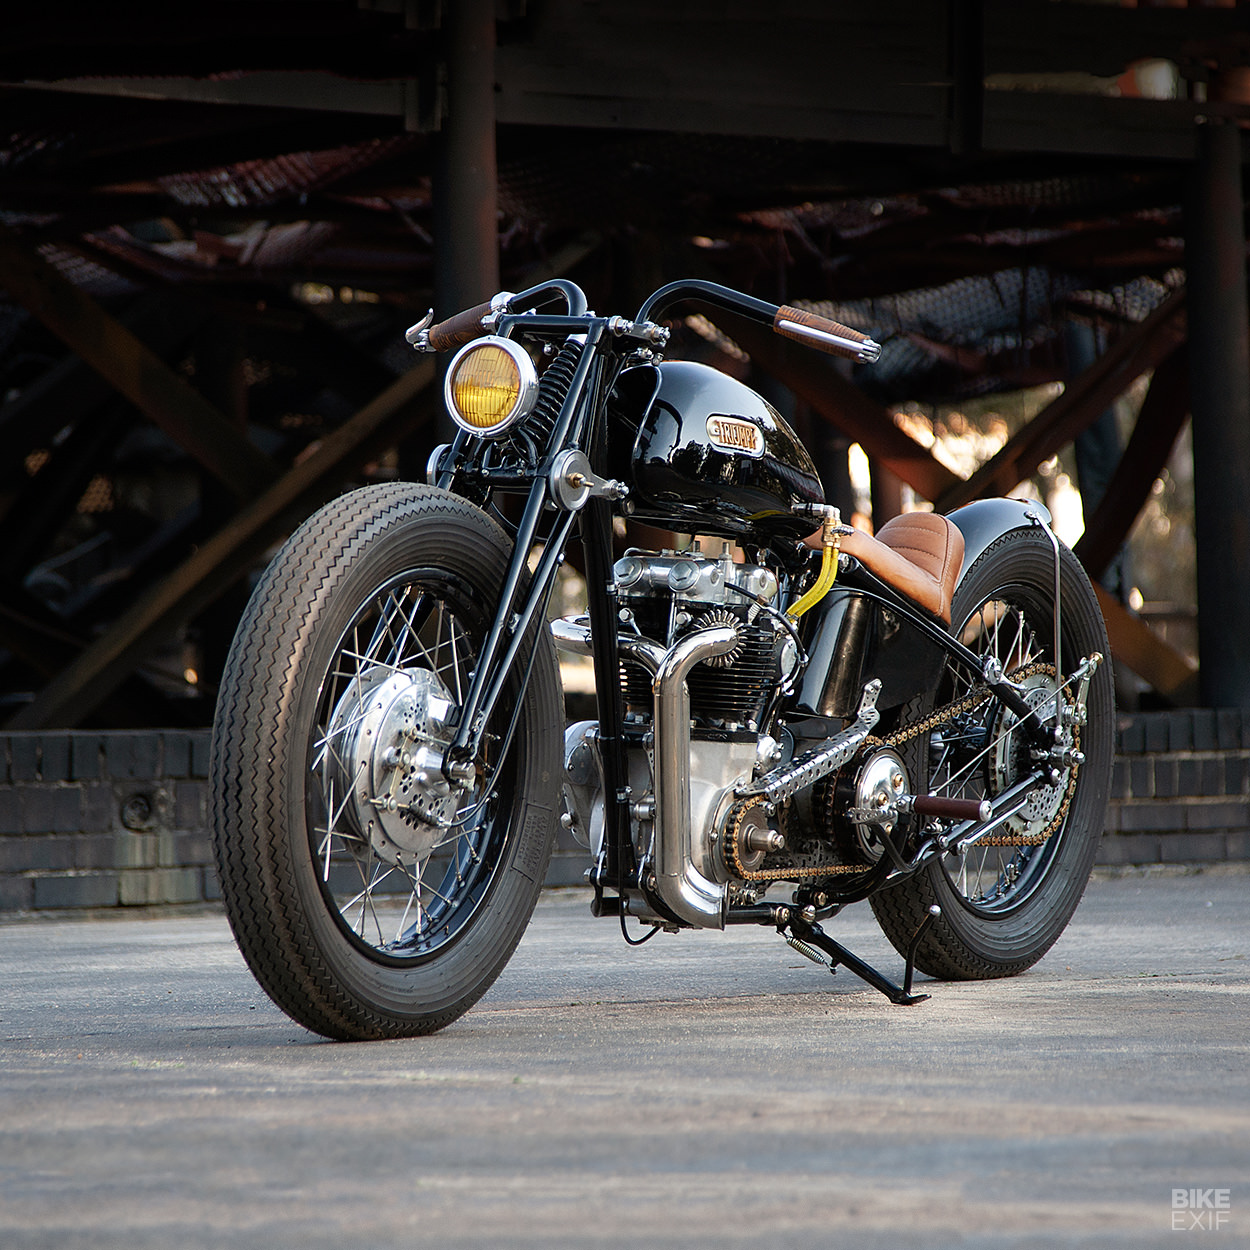 Vintage bobber built from Triumph, BSA and Yamaha parts